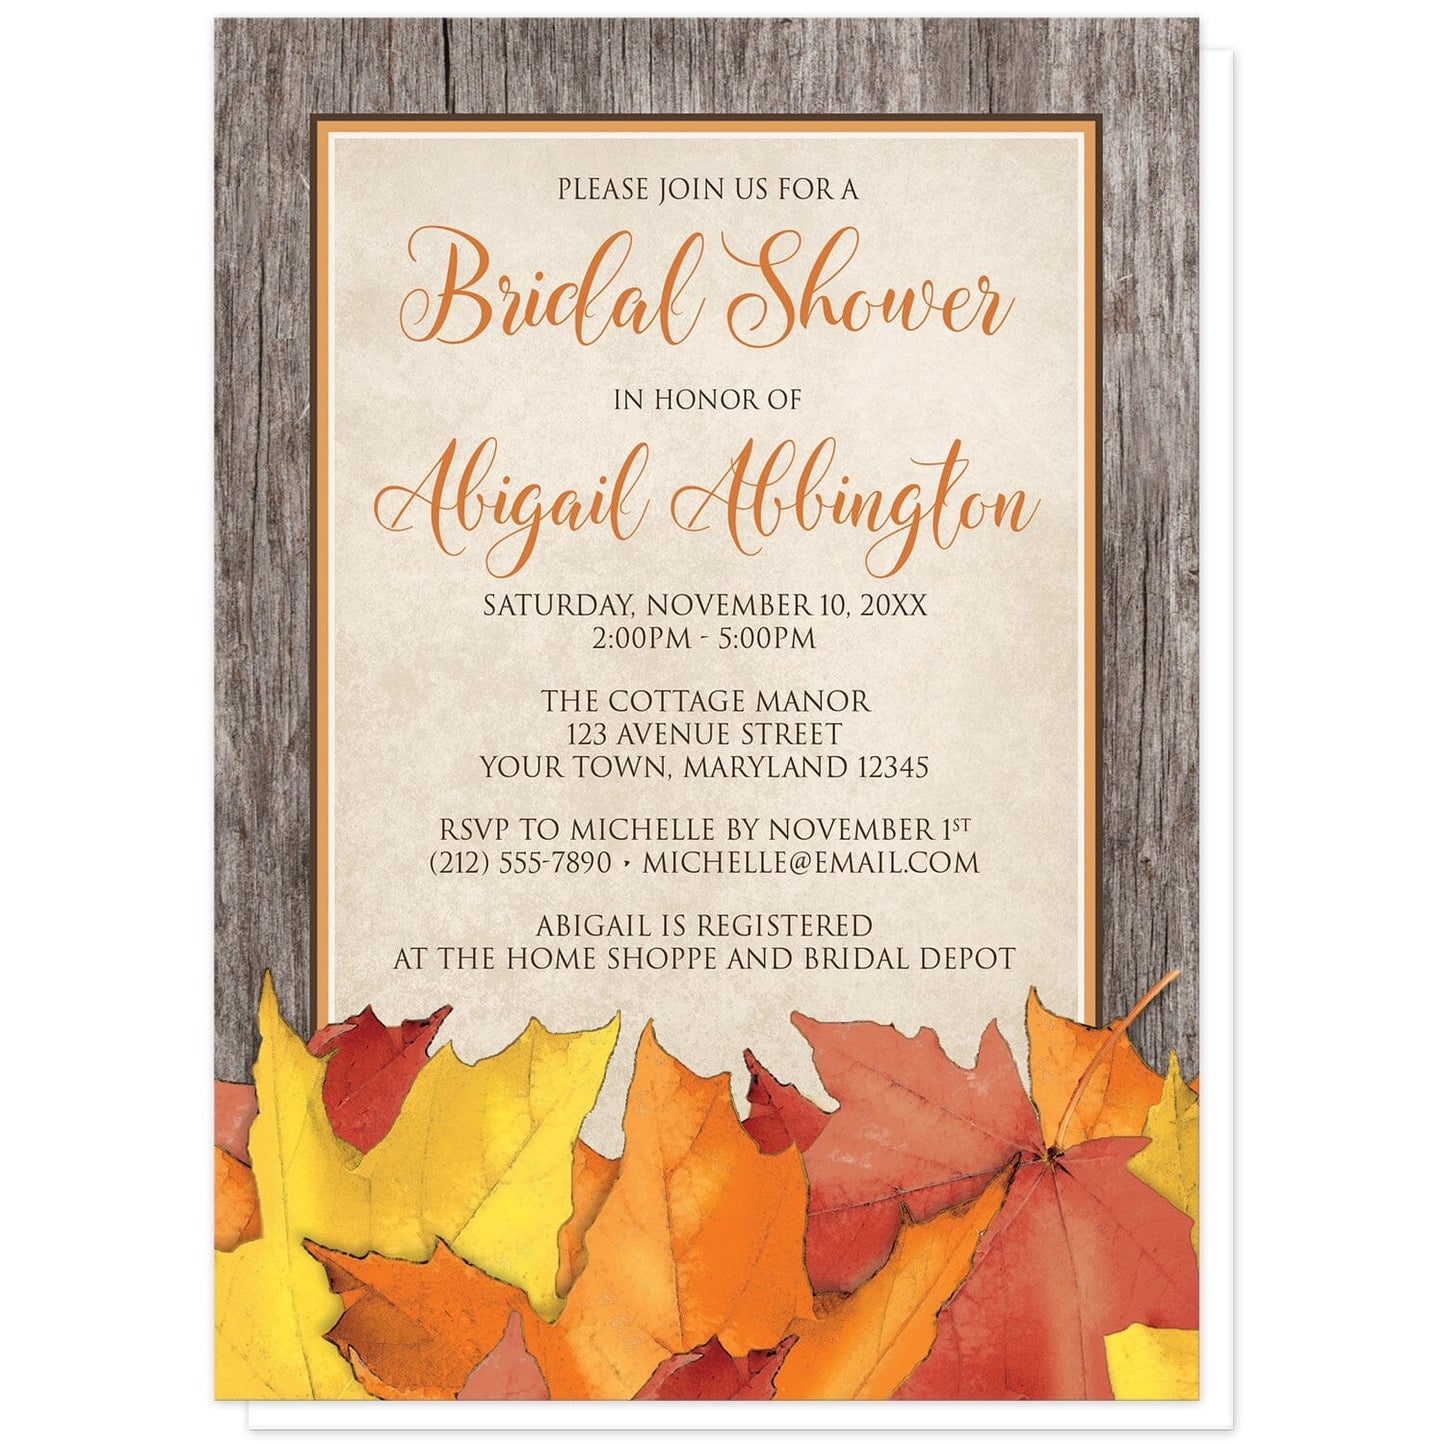 Rustic Wood and Leaves Fall Bridal Shower Invitations at Artistically Invited. Country-inspired rustic wood and leaves fall bridal shower invitations with an arrangement of rustic yellow, orange, and red autumn leaves along the bottom. Your personalized bridal shower celebration details are custom printed in orange and brown over a beige parchment center frame area, outlined in orange and brown, with a brown wood border design. 